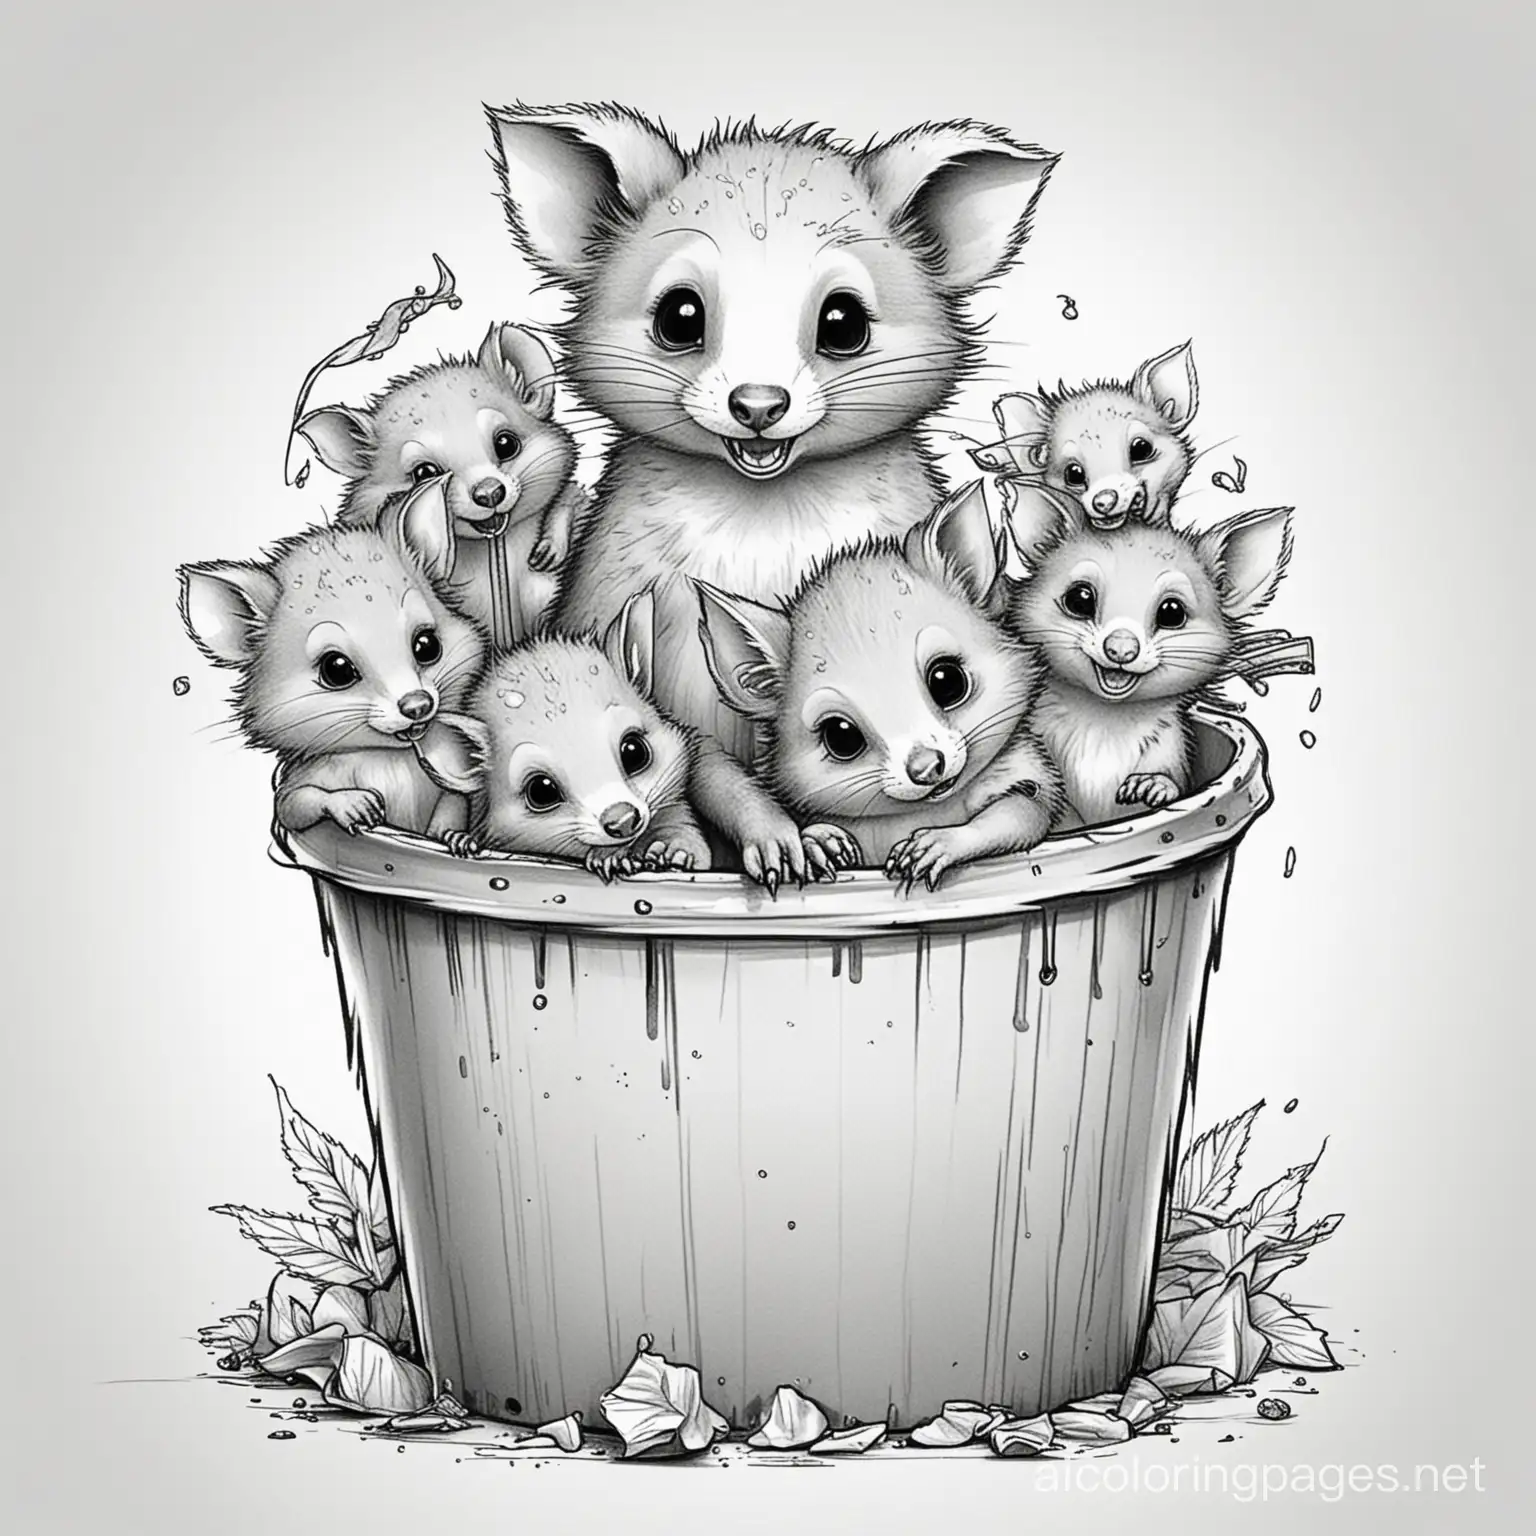 Playful-Possum-Family-Mother-Possum-and-Young-Exploring-a-Trash-Can